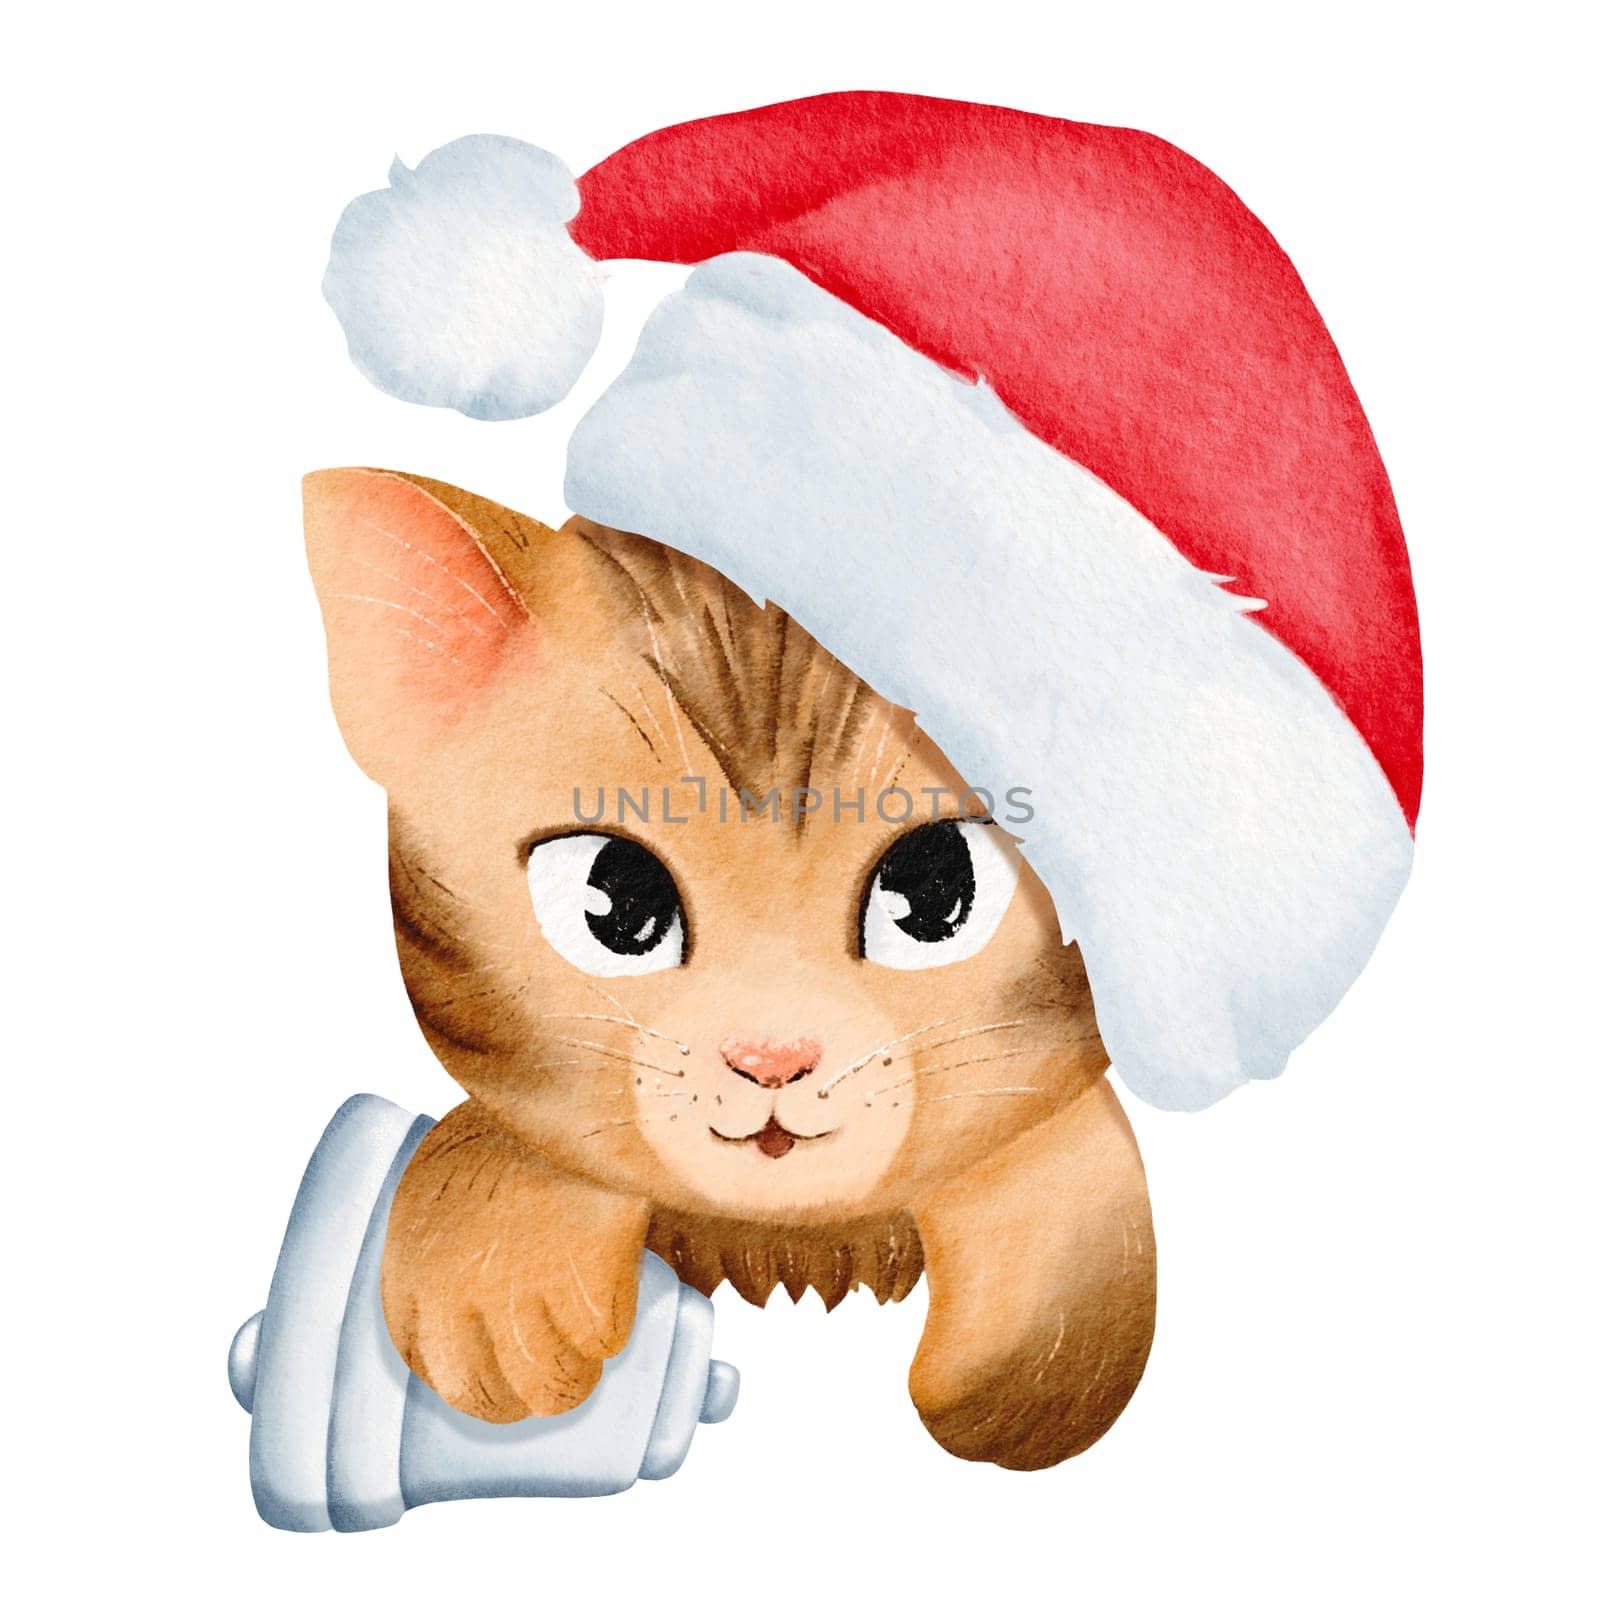 Adorable striped kitten in a Santa hat holds a Christmas bell. Cartoon portrait of a cat exudes a festive new year mood. Ideal for cards, invites, posters, stickers. Watercolor illustration.